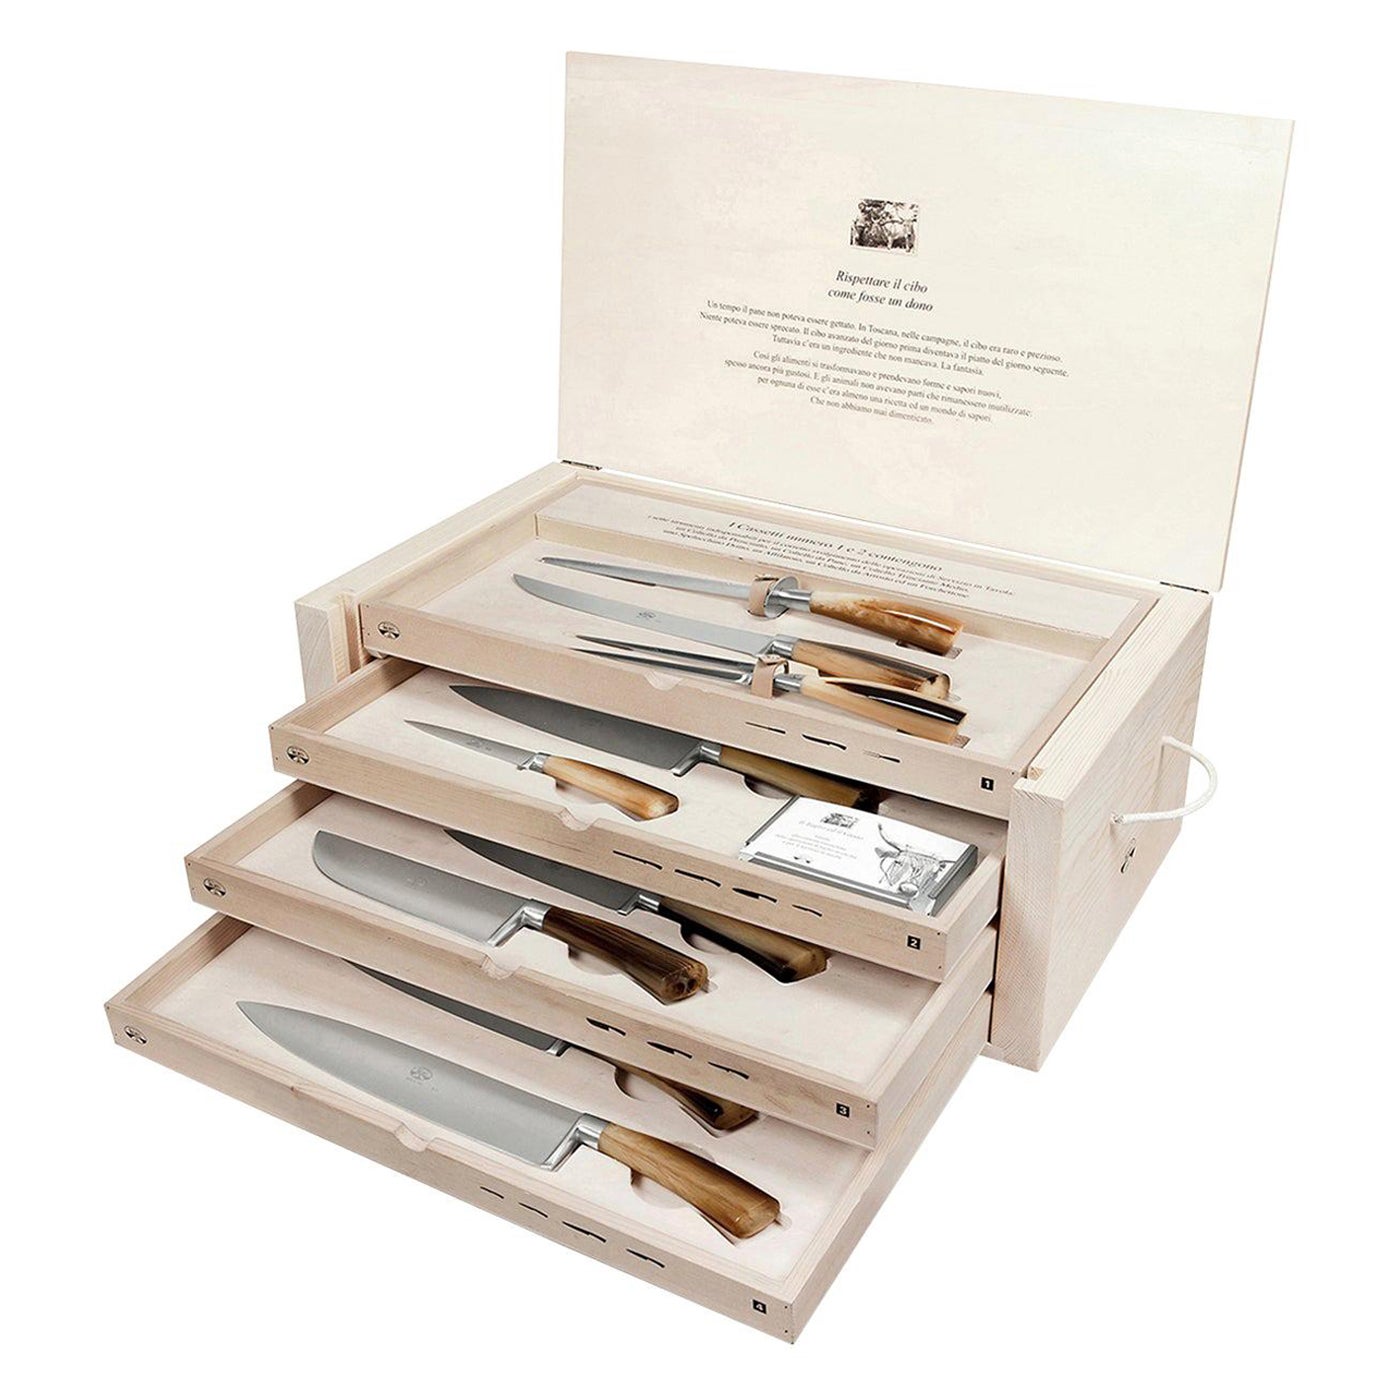 Il Trinciante Complete Set of Knives with Cornotech Handle by Coltellerie Berti